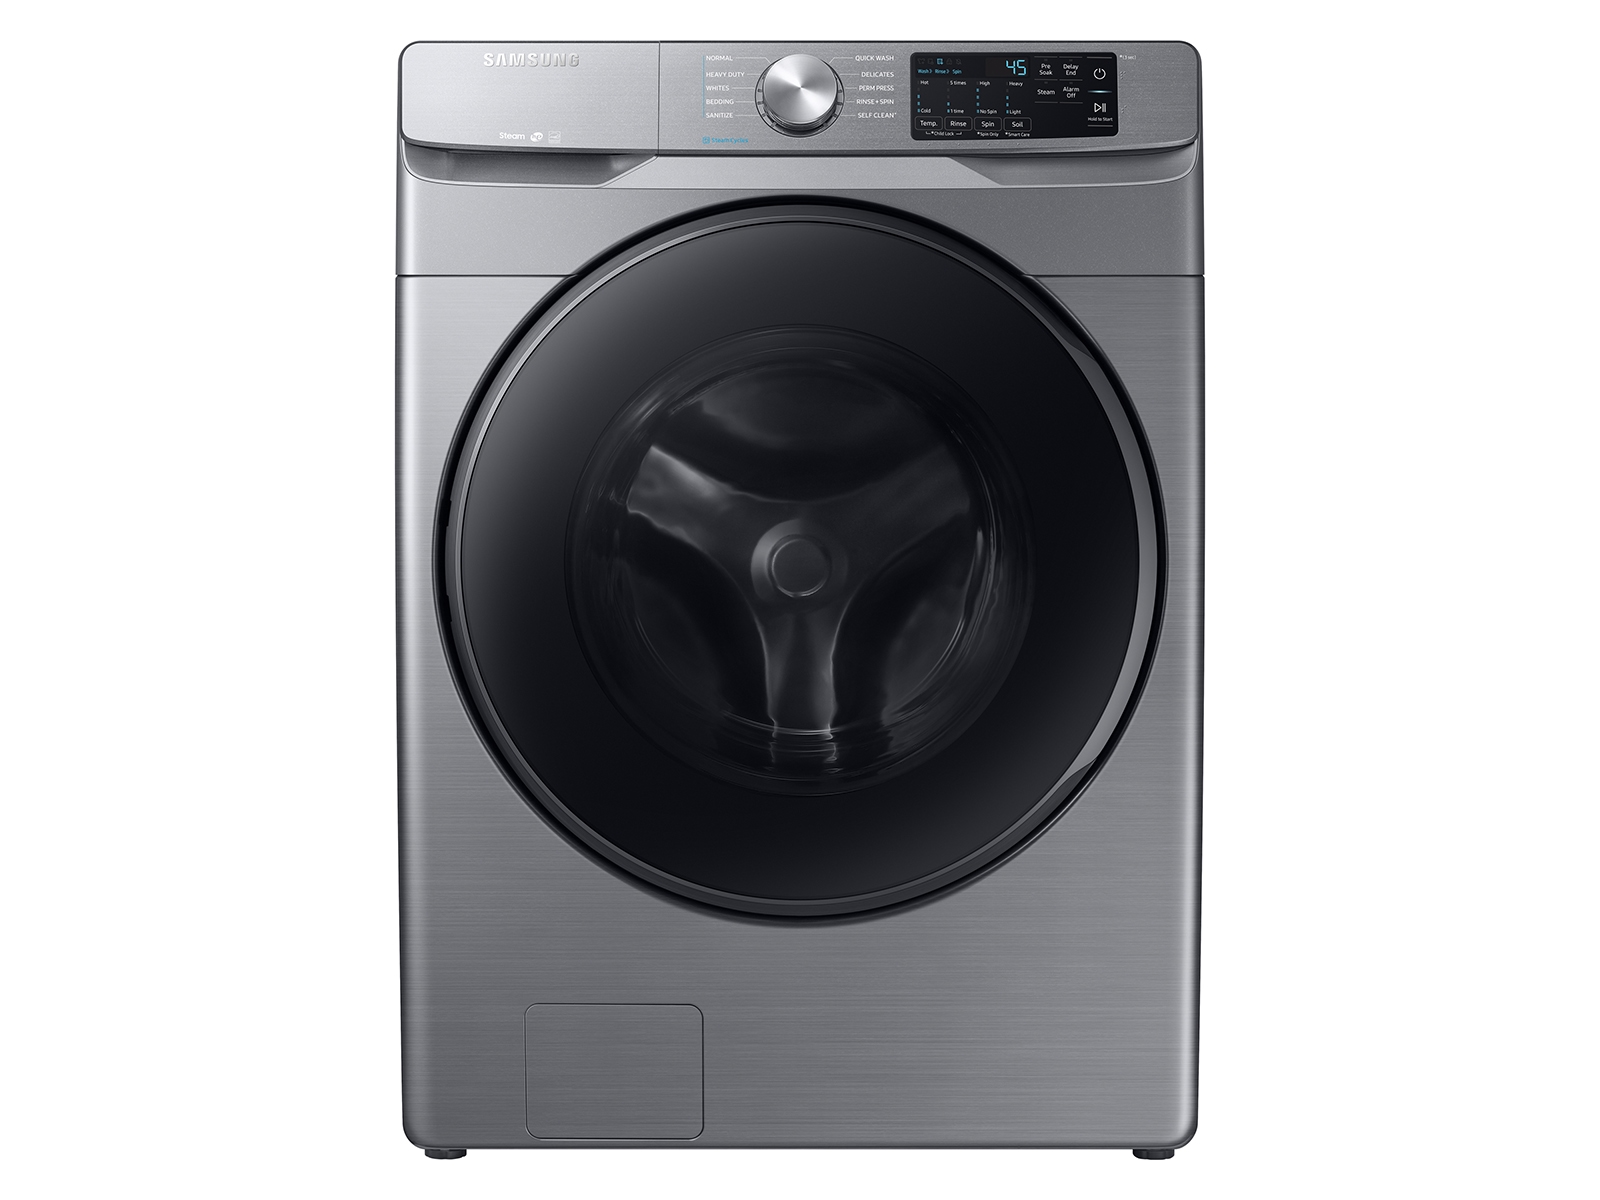 Samsung 4.5 cu. ft. Front Load Washer with Steam in Platinum(WF45R6100AP/US)